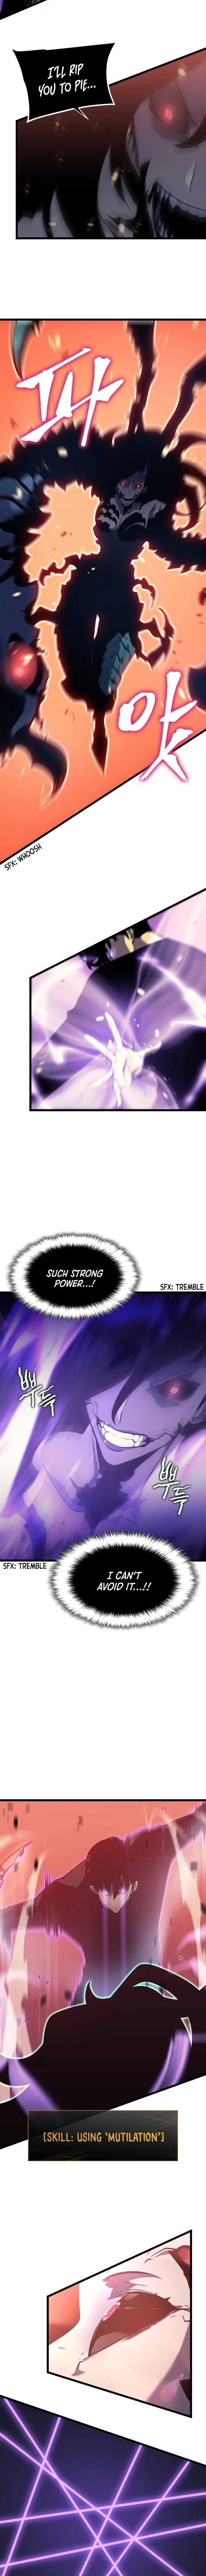 Solo leveling Chapter 160 17